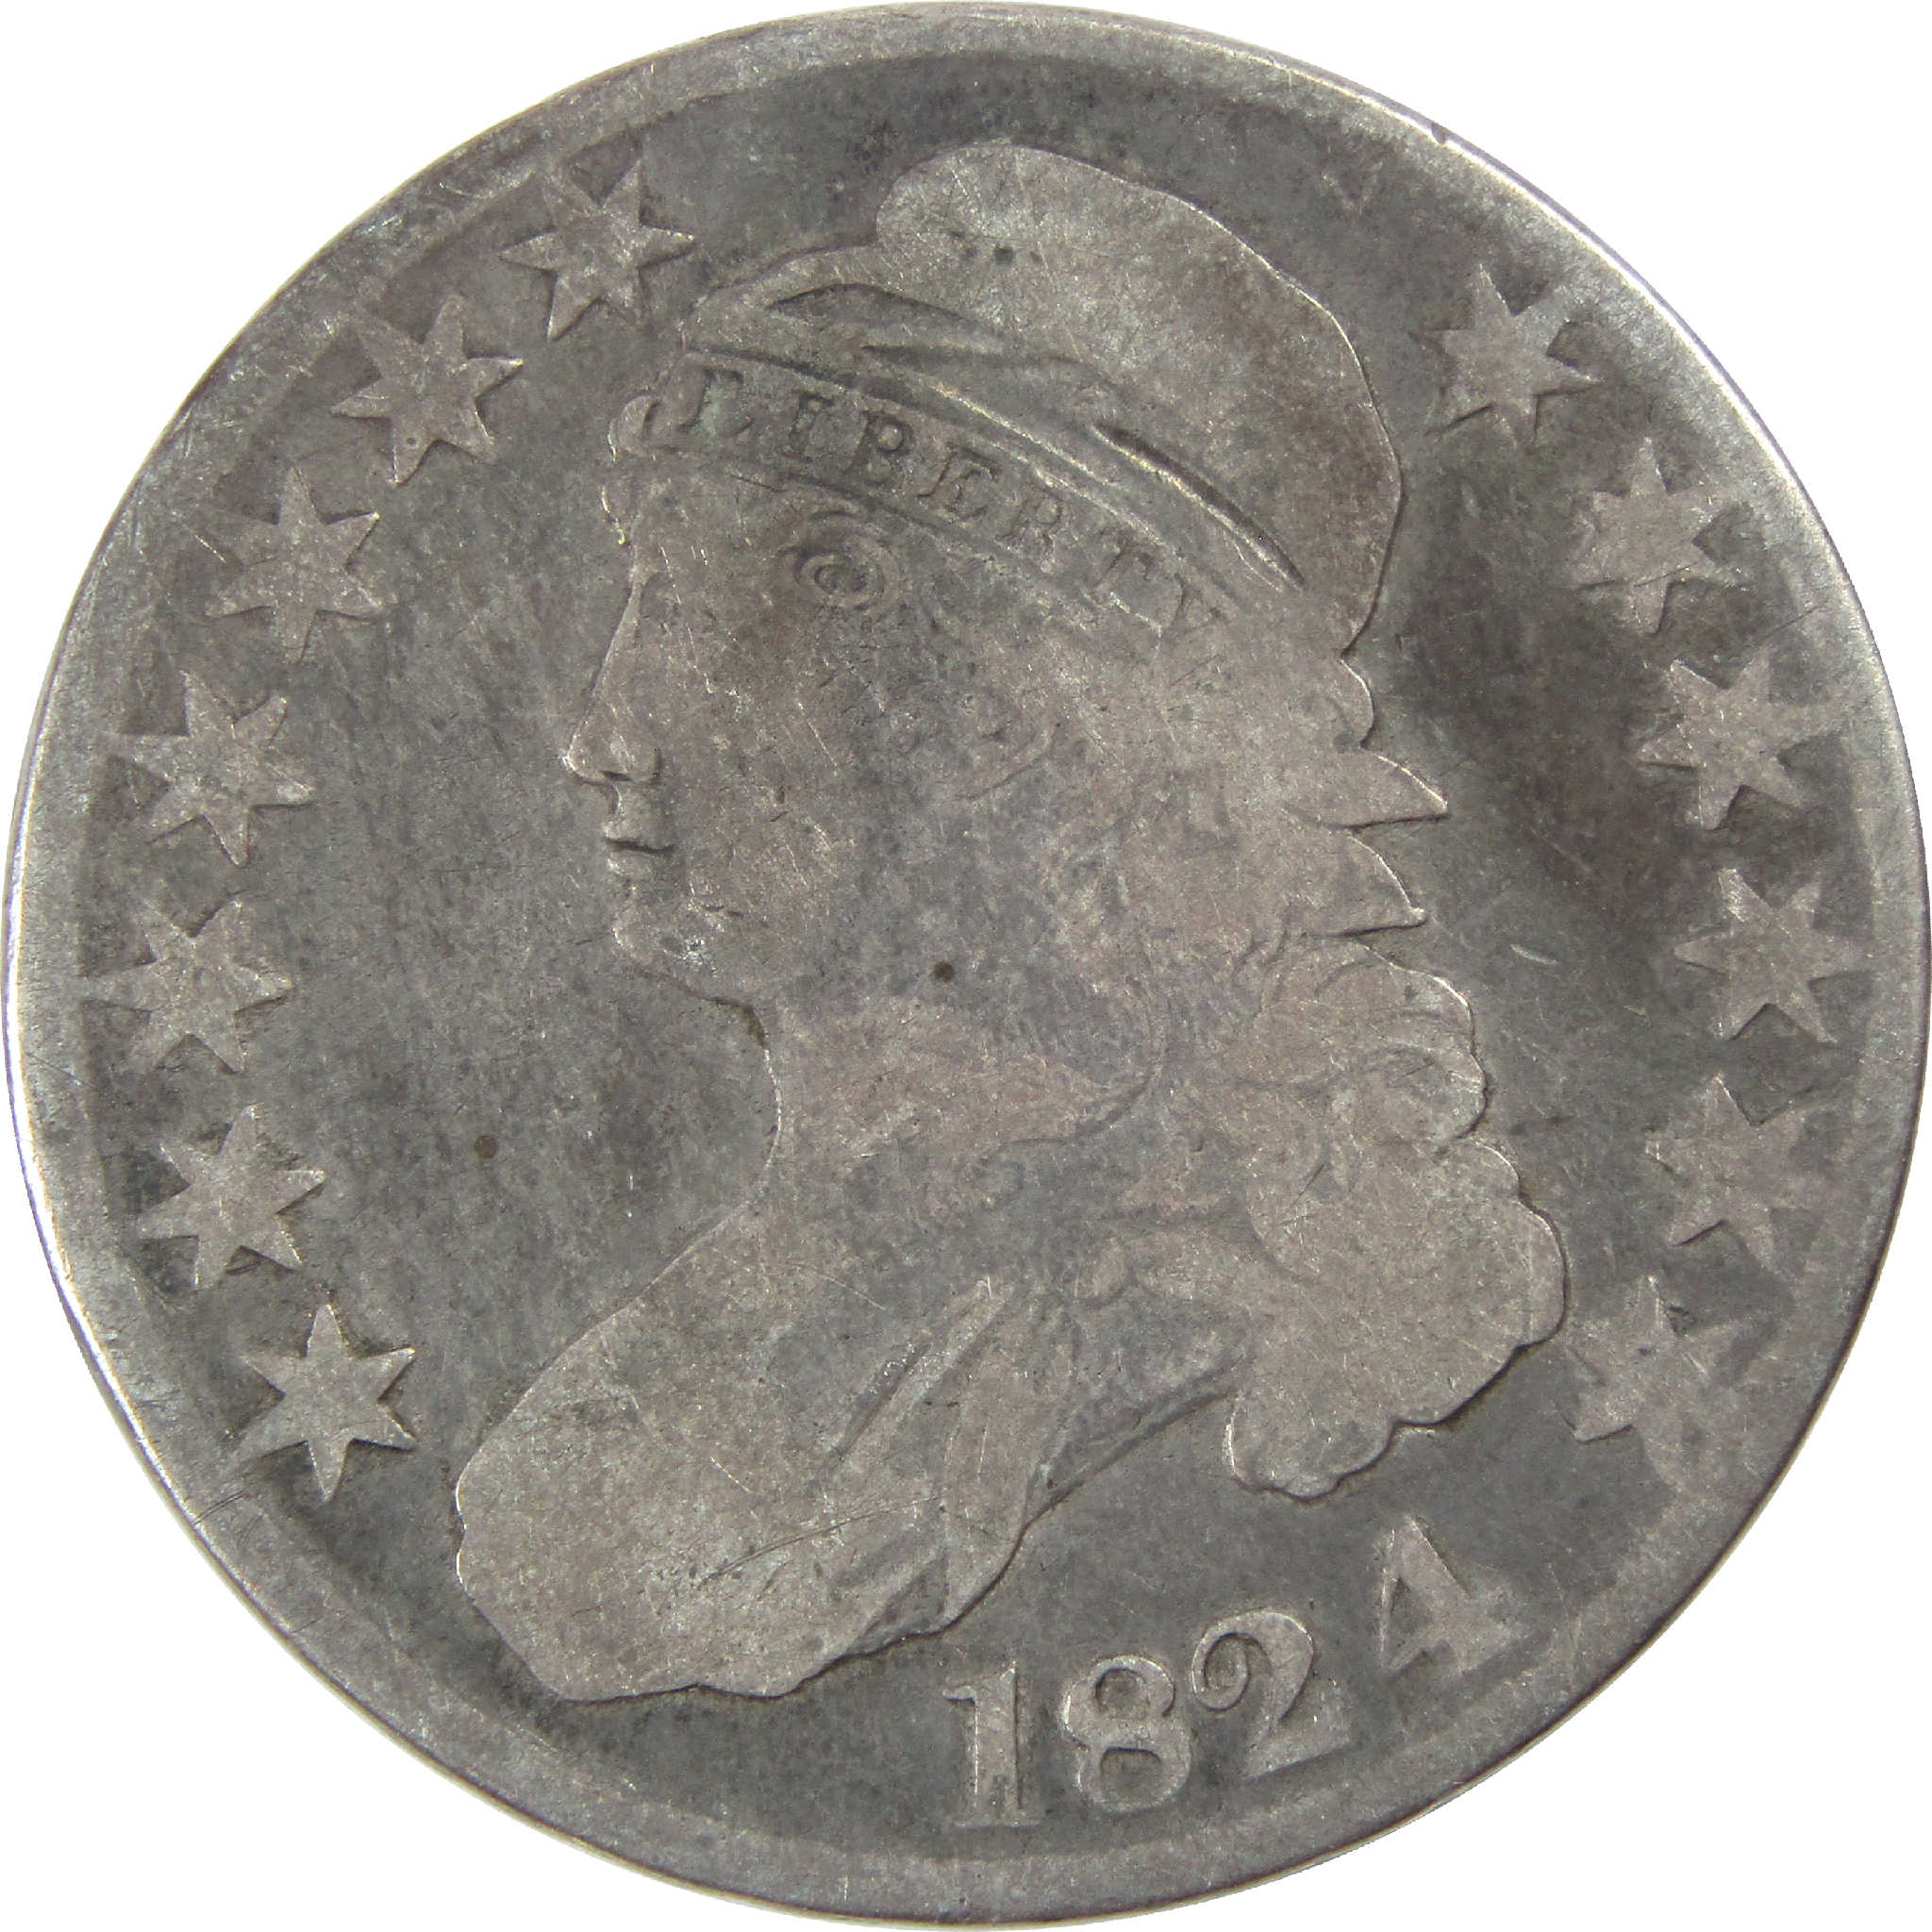 1824 Normal Date Capped Bust Half Dollar AG Silver 50c Coin SKU:I11754